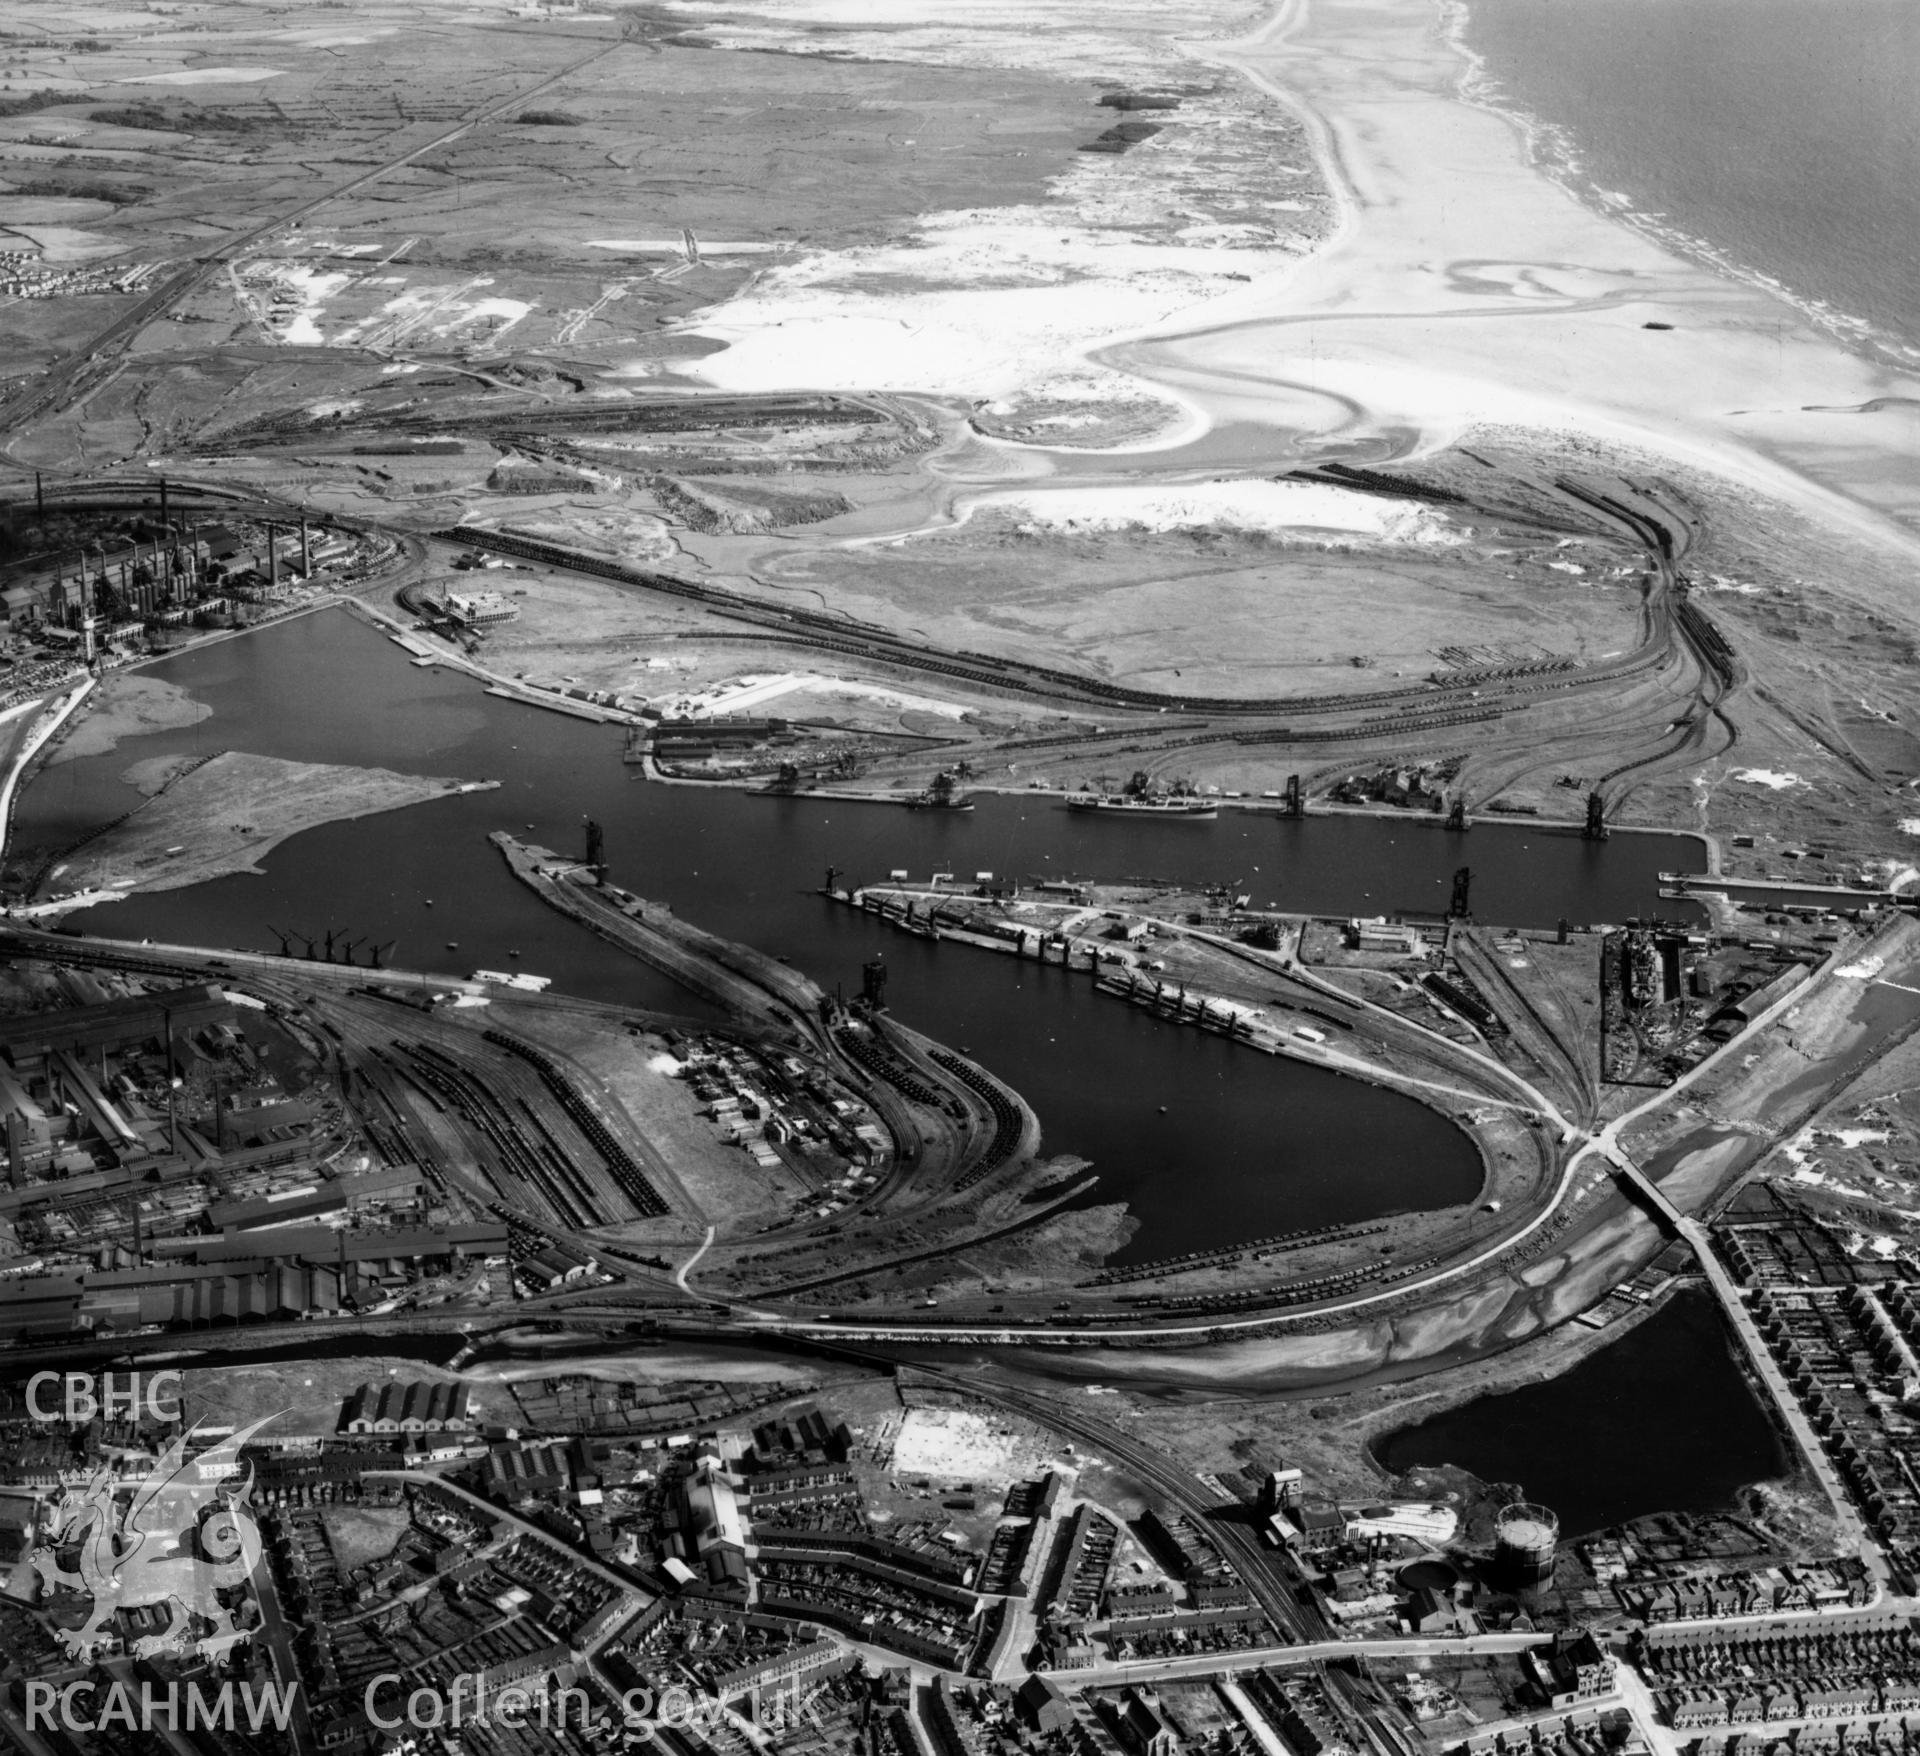 General view of Port Talbot docks. Oblique aerial photograph, 5?" cut roll film.